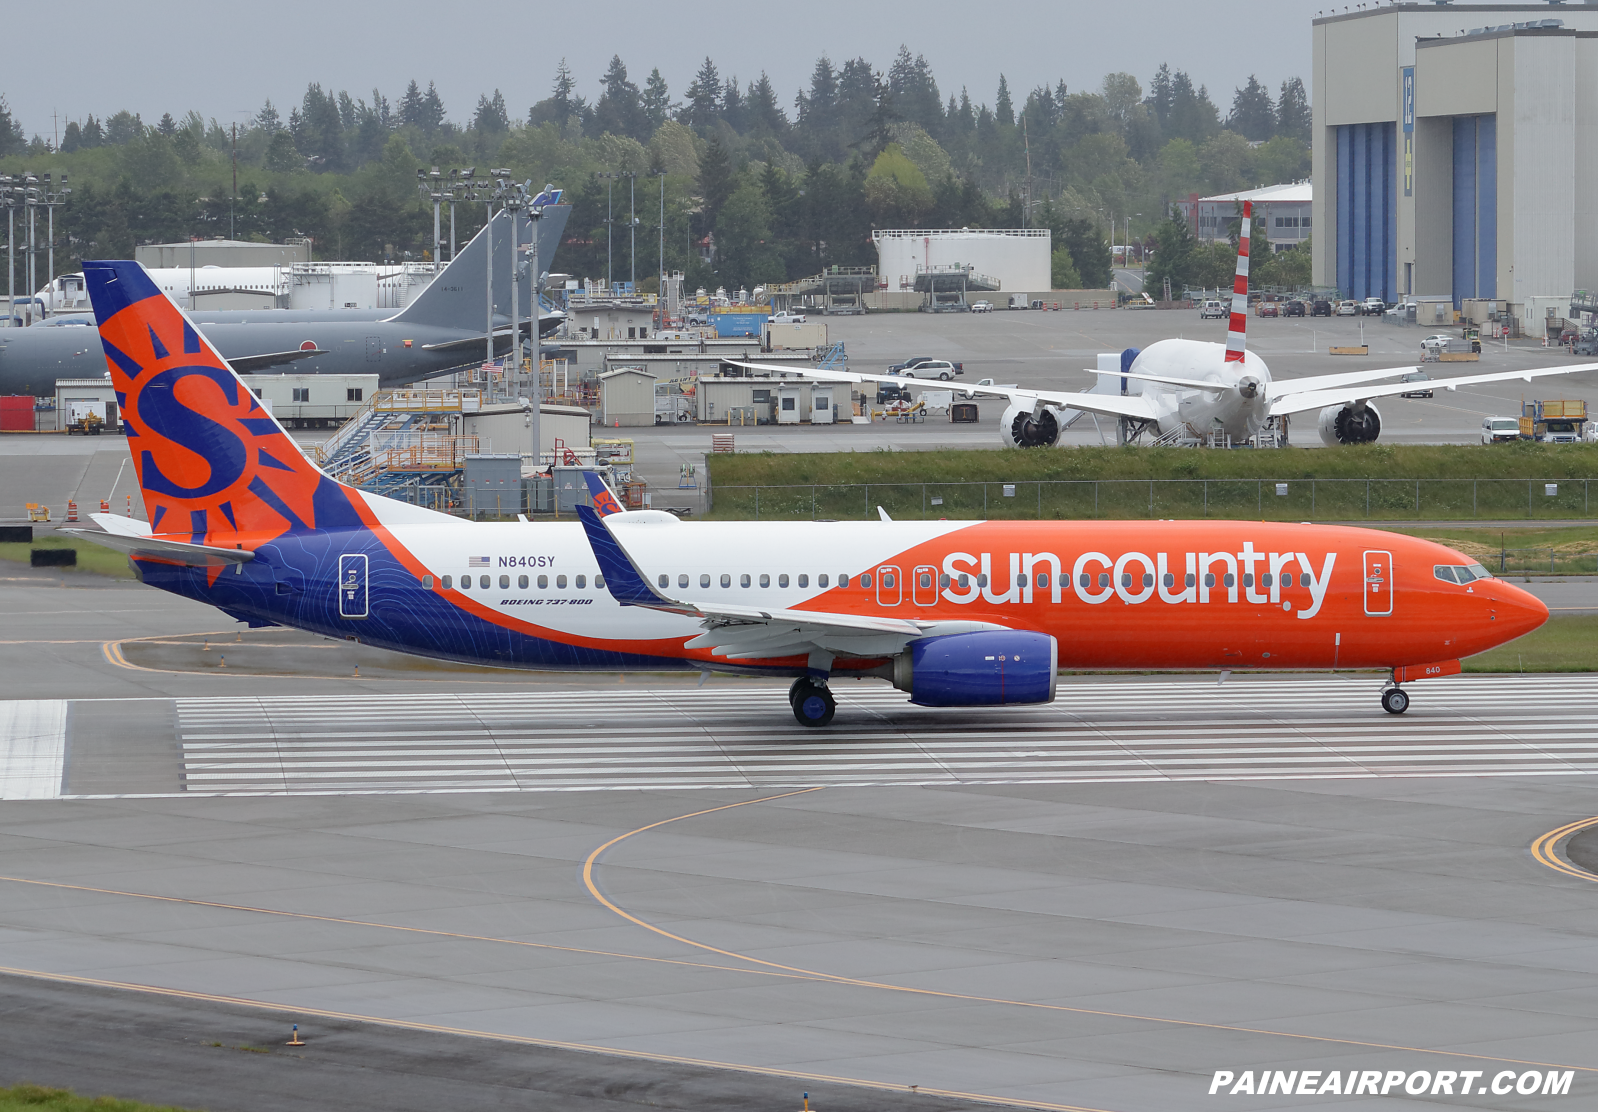 Sun Country Airlines 737 N840SY at KPAE Paine Field